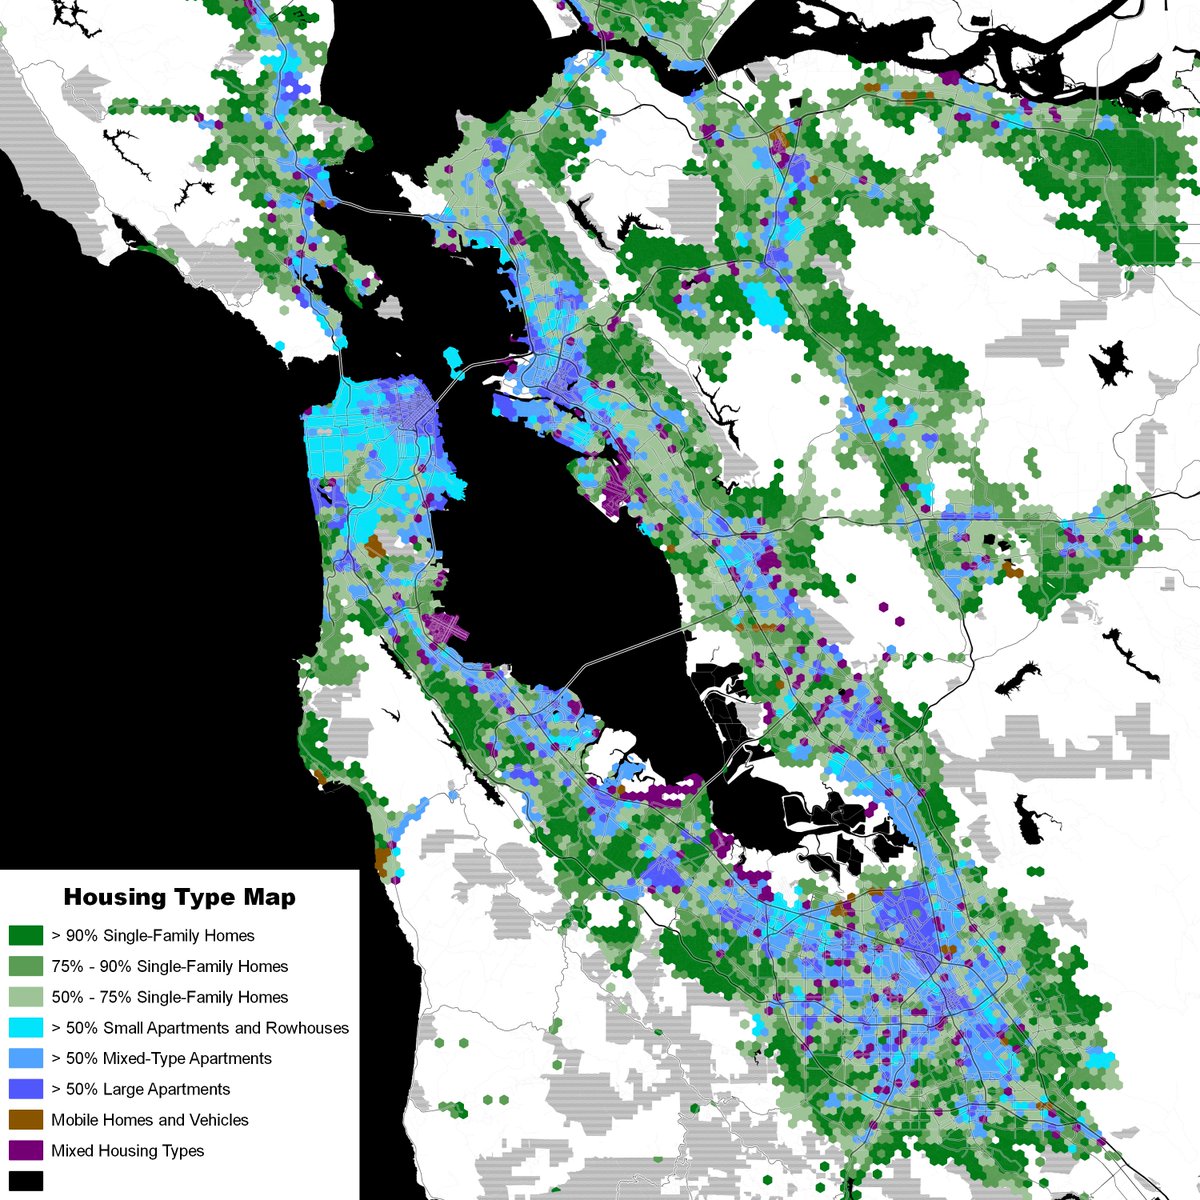 San Francisco is interesting because it gives us a look at actual pre-War urbanism in San Francisco/Oakland, and then sprawl masquerading as the second largest city in California to the south.